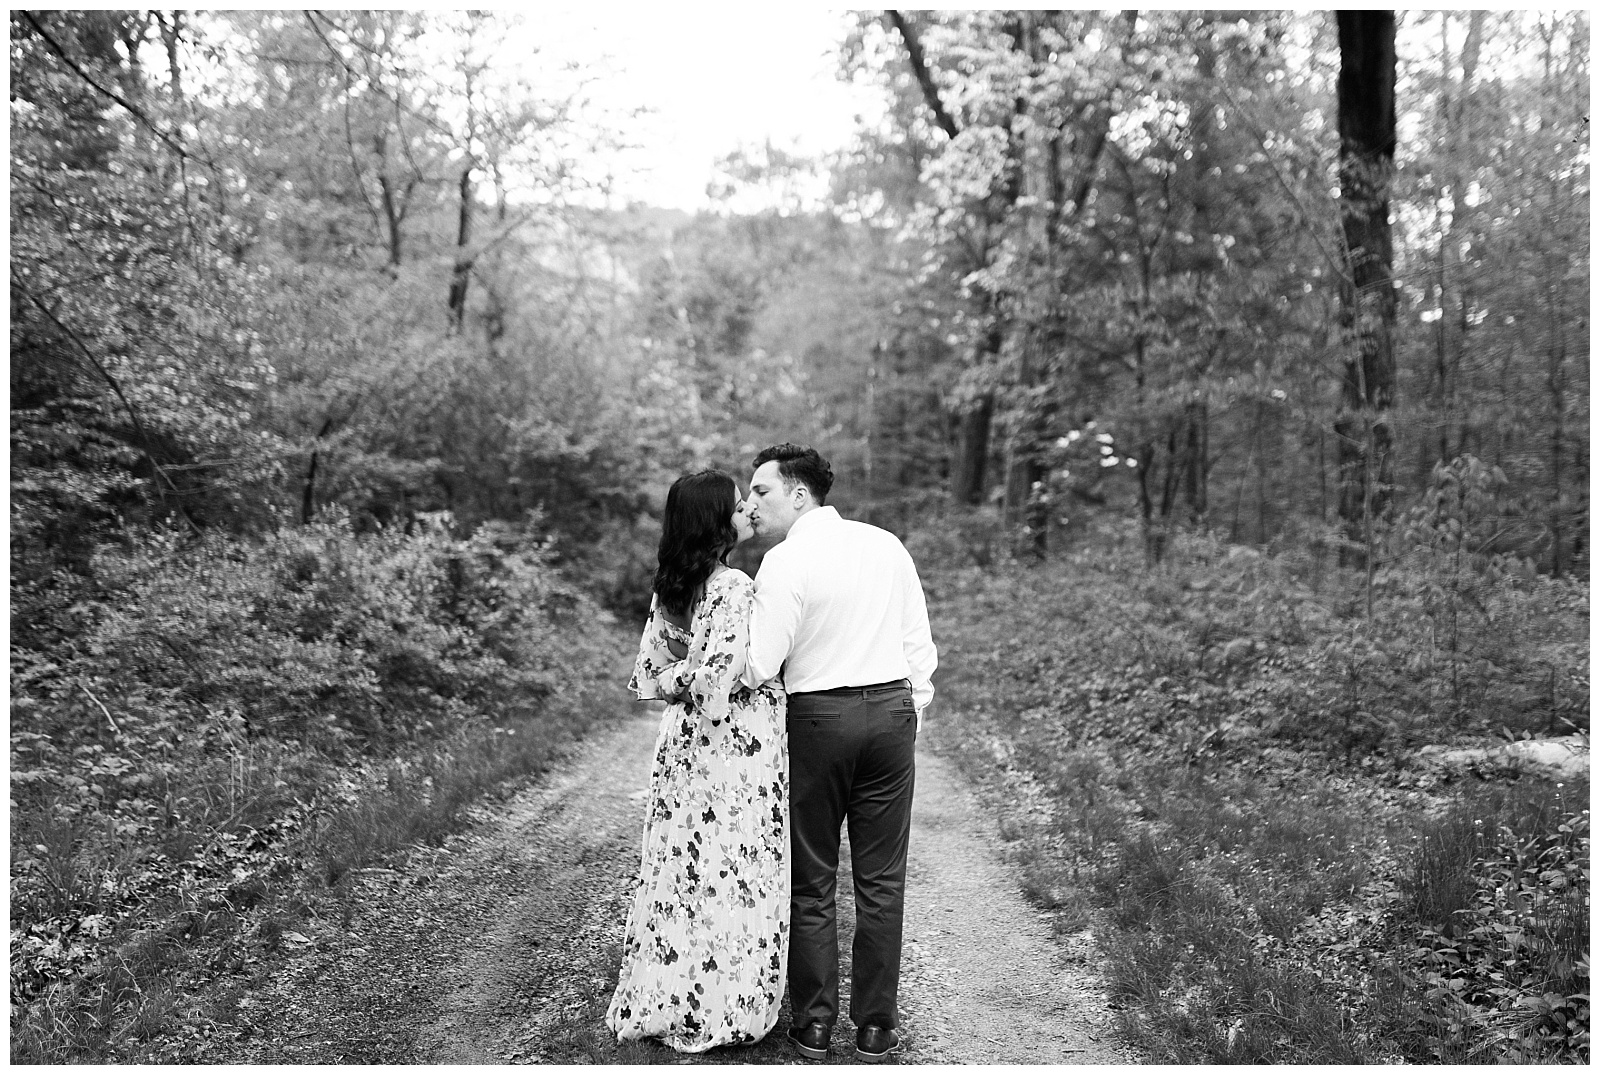 A couple stands on a path in the woods kissing.